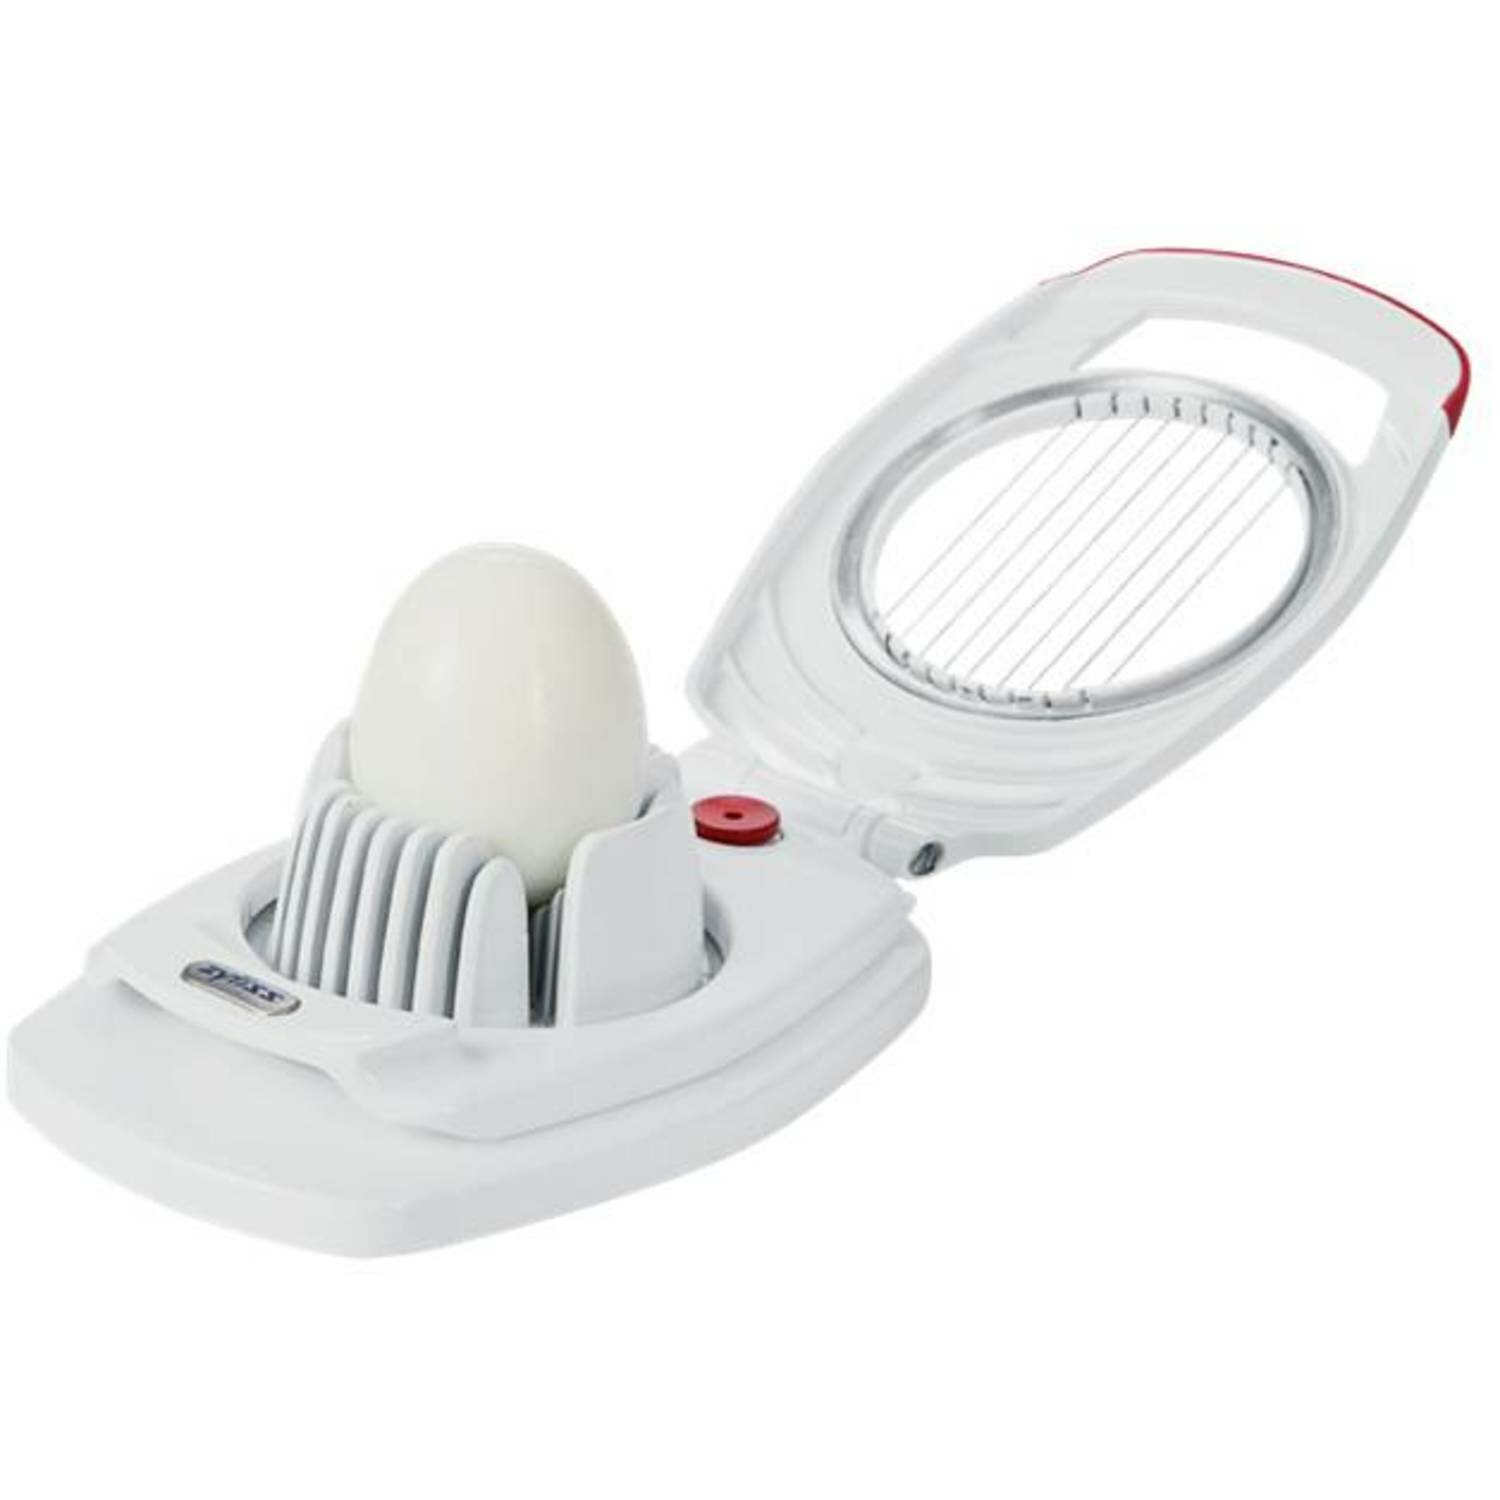 Zyliss Cheese Slicer, Dial & Slice